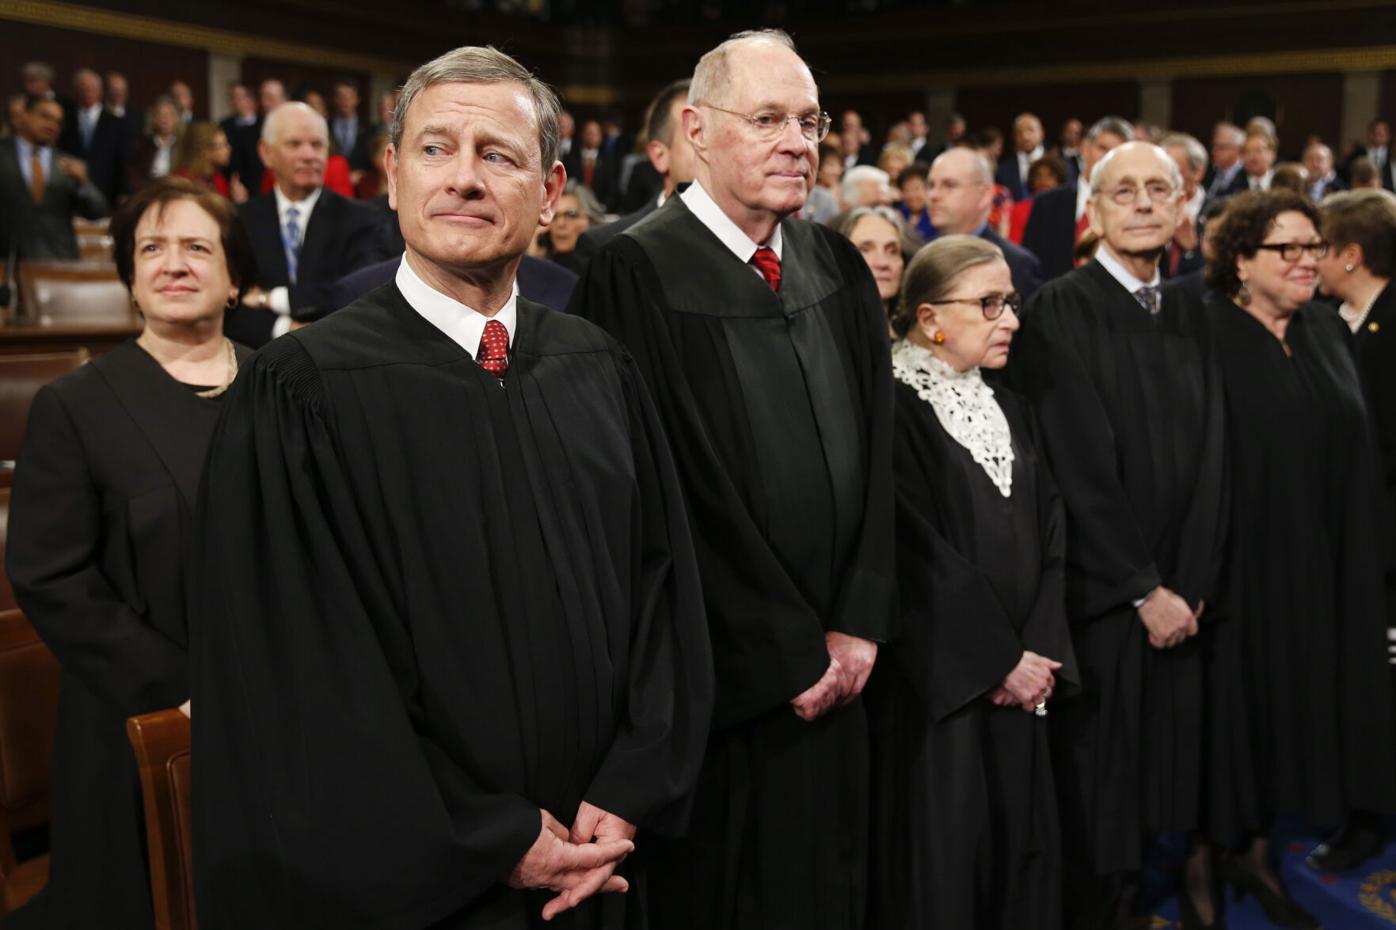 Clarence Thomas, Sonia Sotomayor, other justices remember RBG